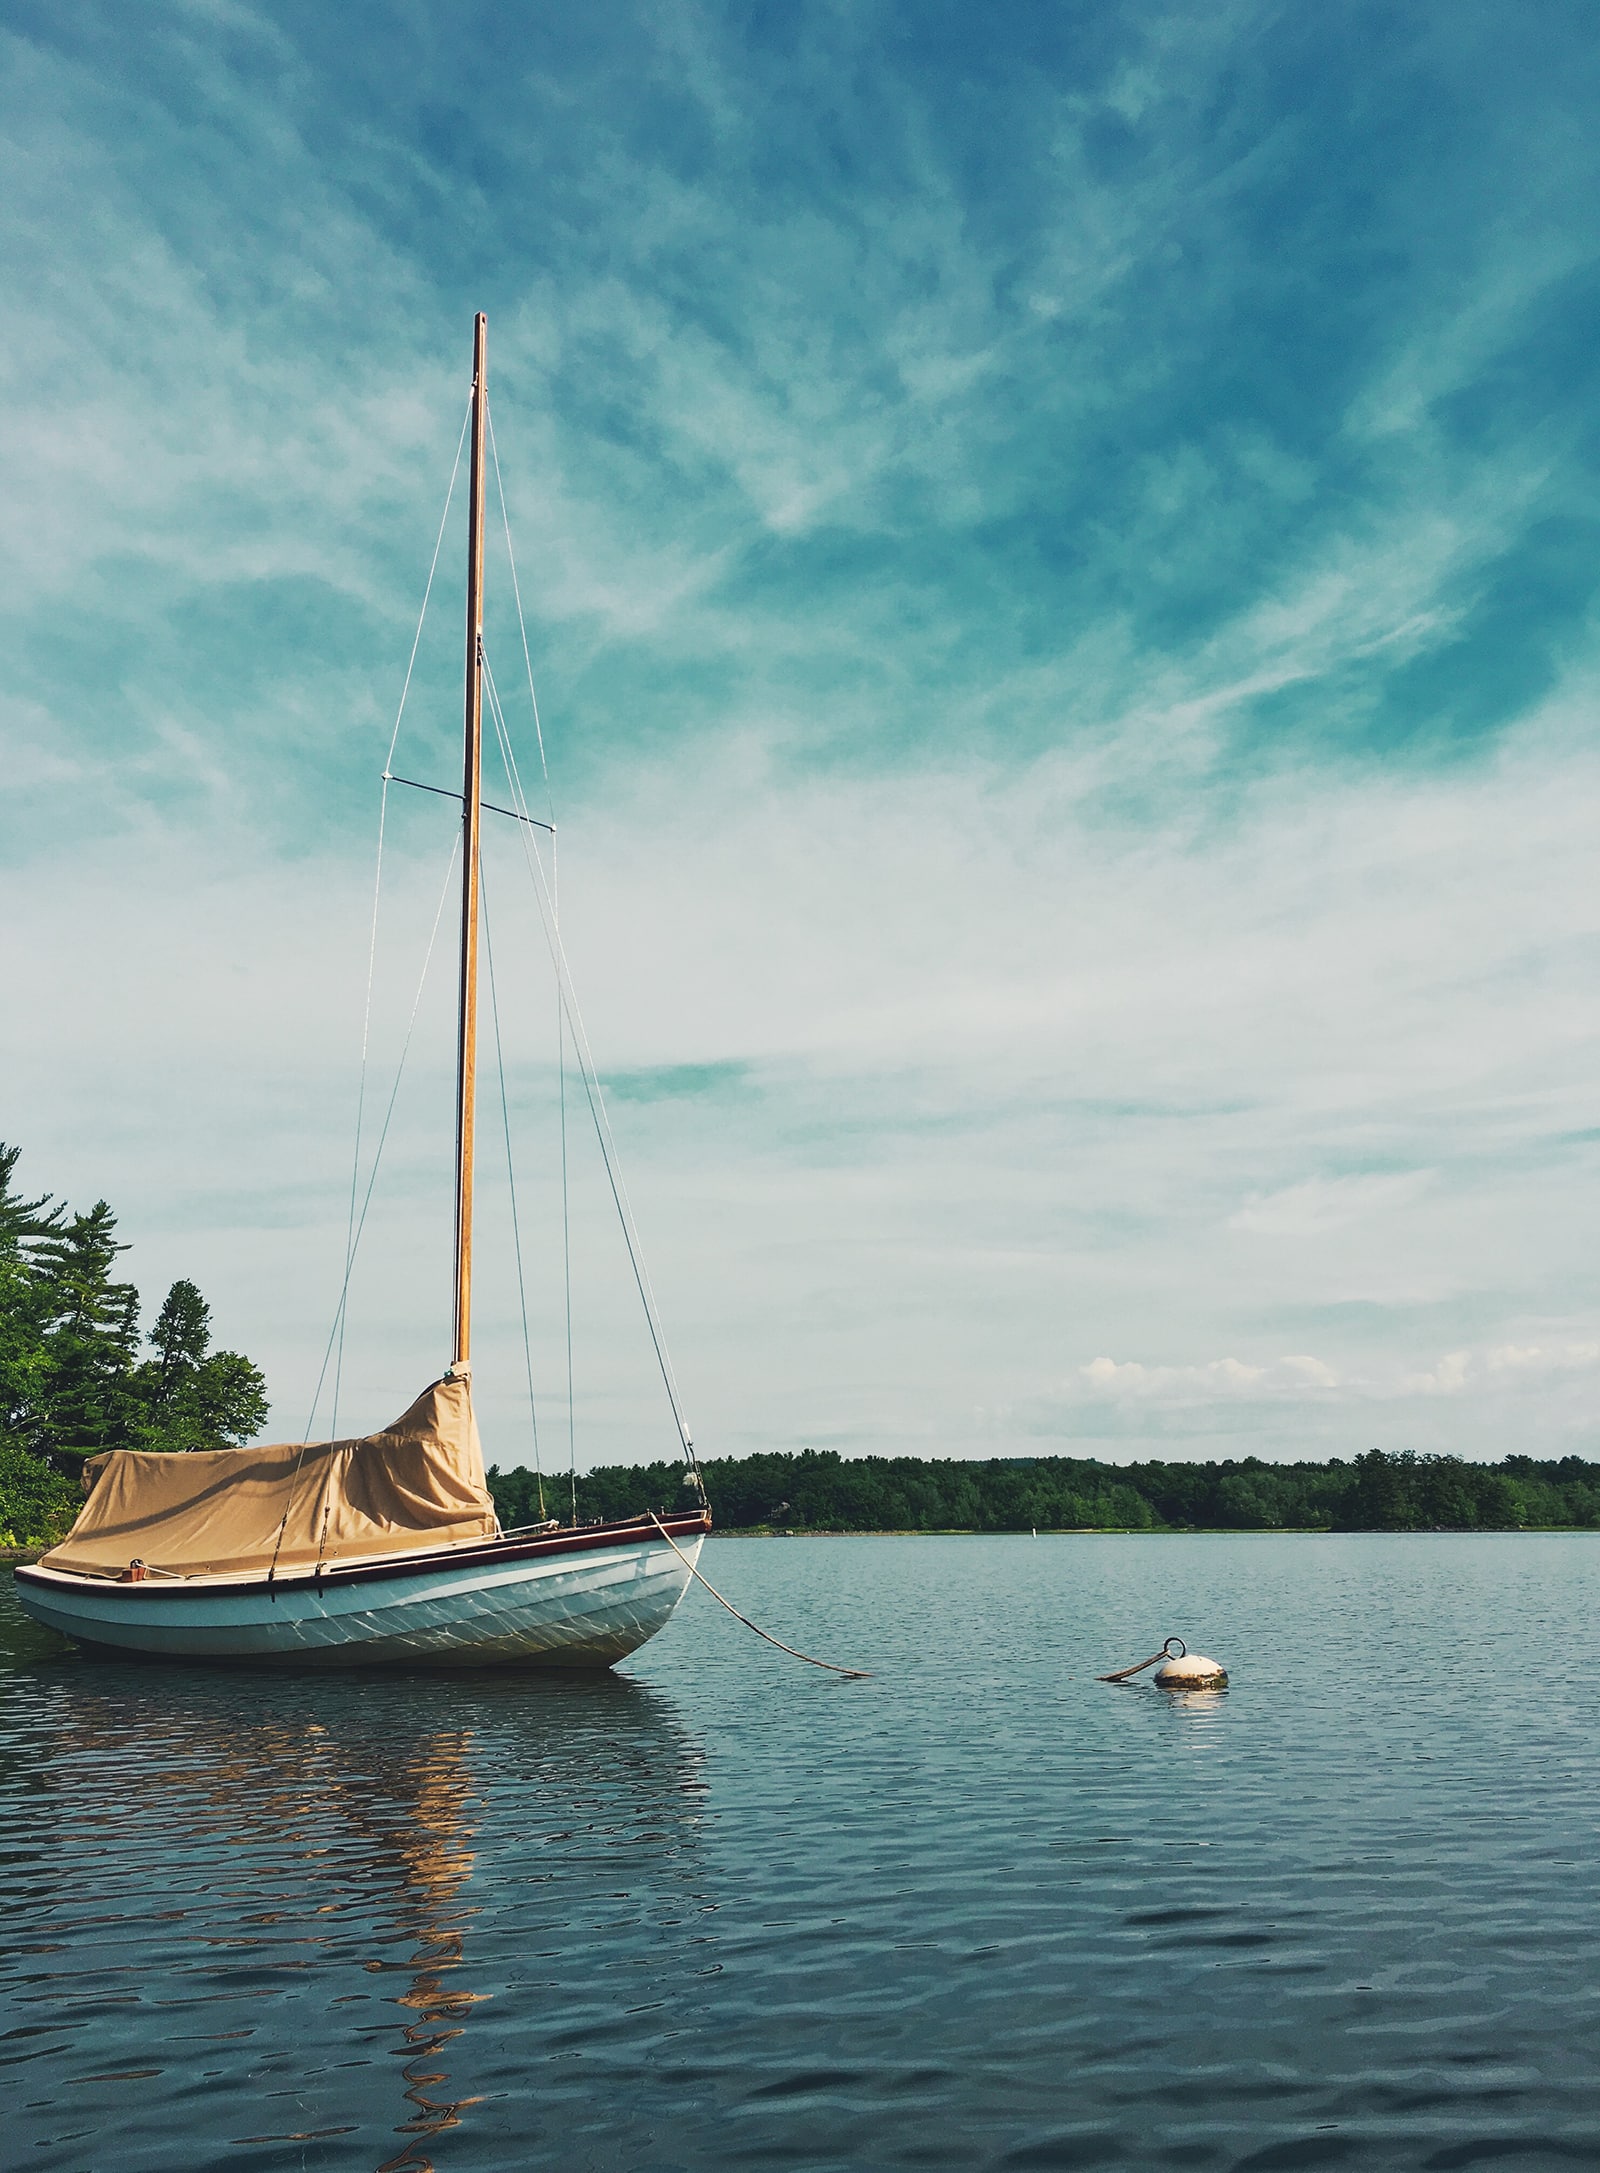 Title: Summer Transportation Location: Androscoggin Lake, ME Judge's comments: "This photograph depicts a summer scene, or perhaps a moment after summer has ended, as the boat is secured and covered. The sailboat indicates either human presence or an absent owner. The aqua, white, green and beige are a pleasing and serene palette. The reflection of the mast leads us in and out of the photograph. The water is calm and the angular clouds point to the anchored sailboat. The boat is set off-center, with the anchor as its period at the end of the sentence, stopping the boat from setting sail." 